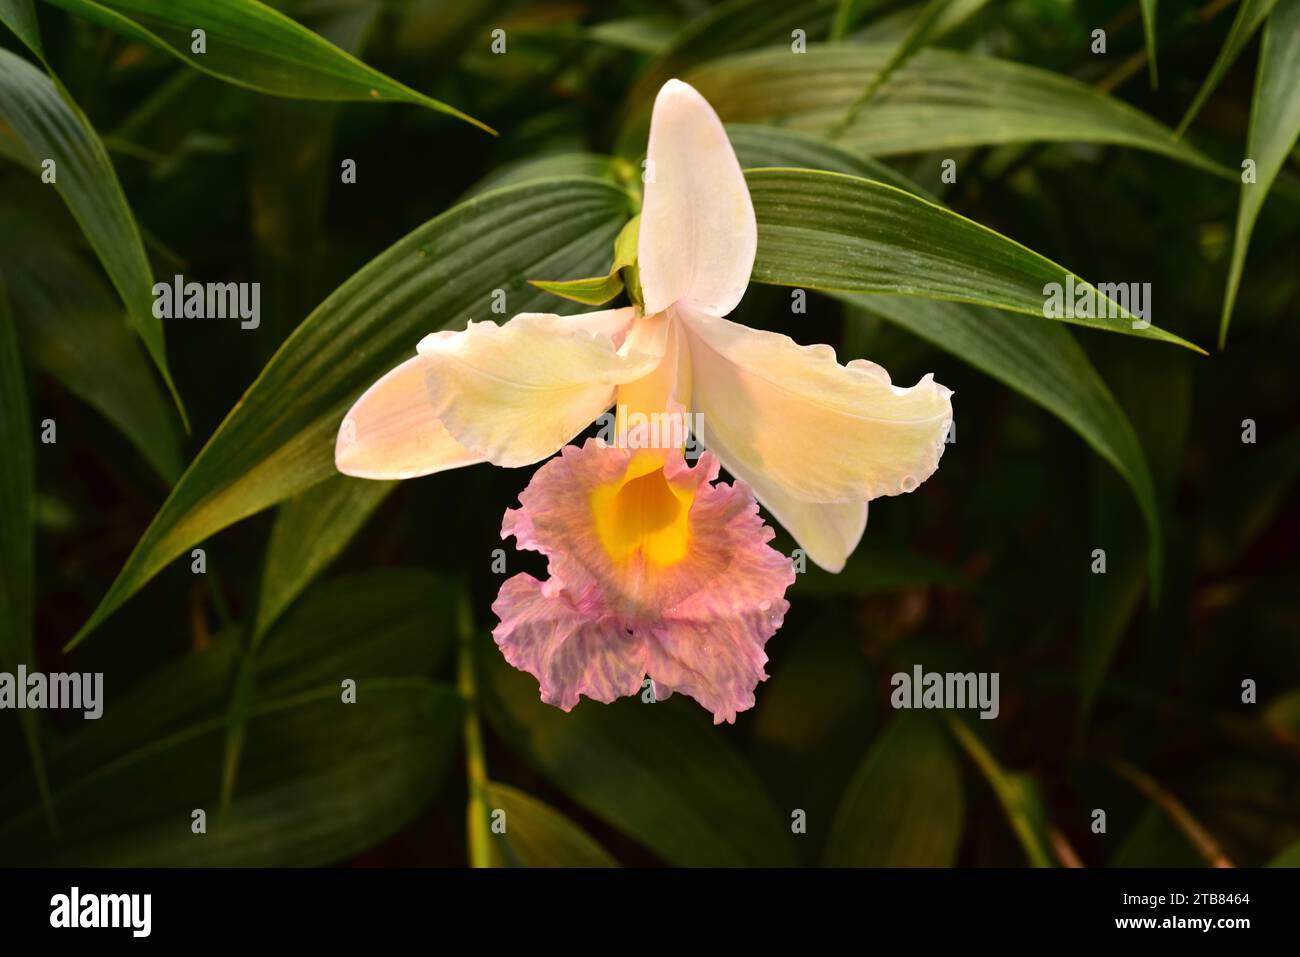 Large-flowered sobralia (Sobralia macrantha) is an ornamental orchid native to Central America and Mexico. Stock Photo